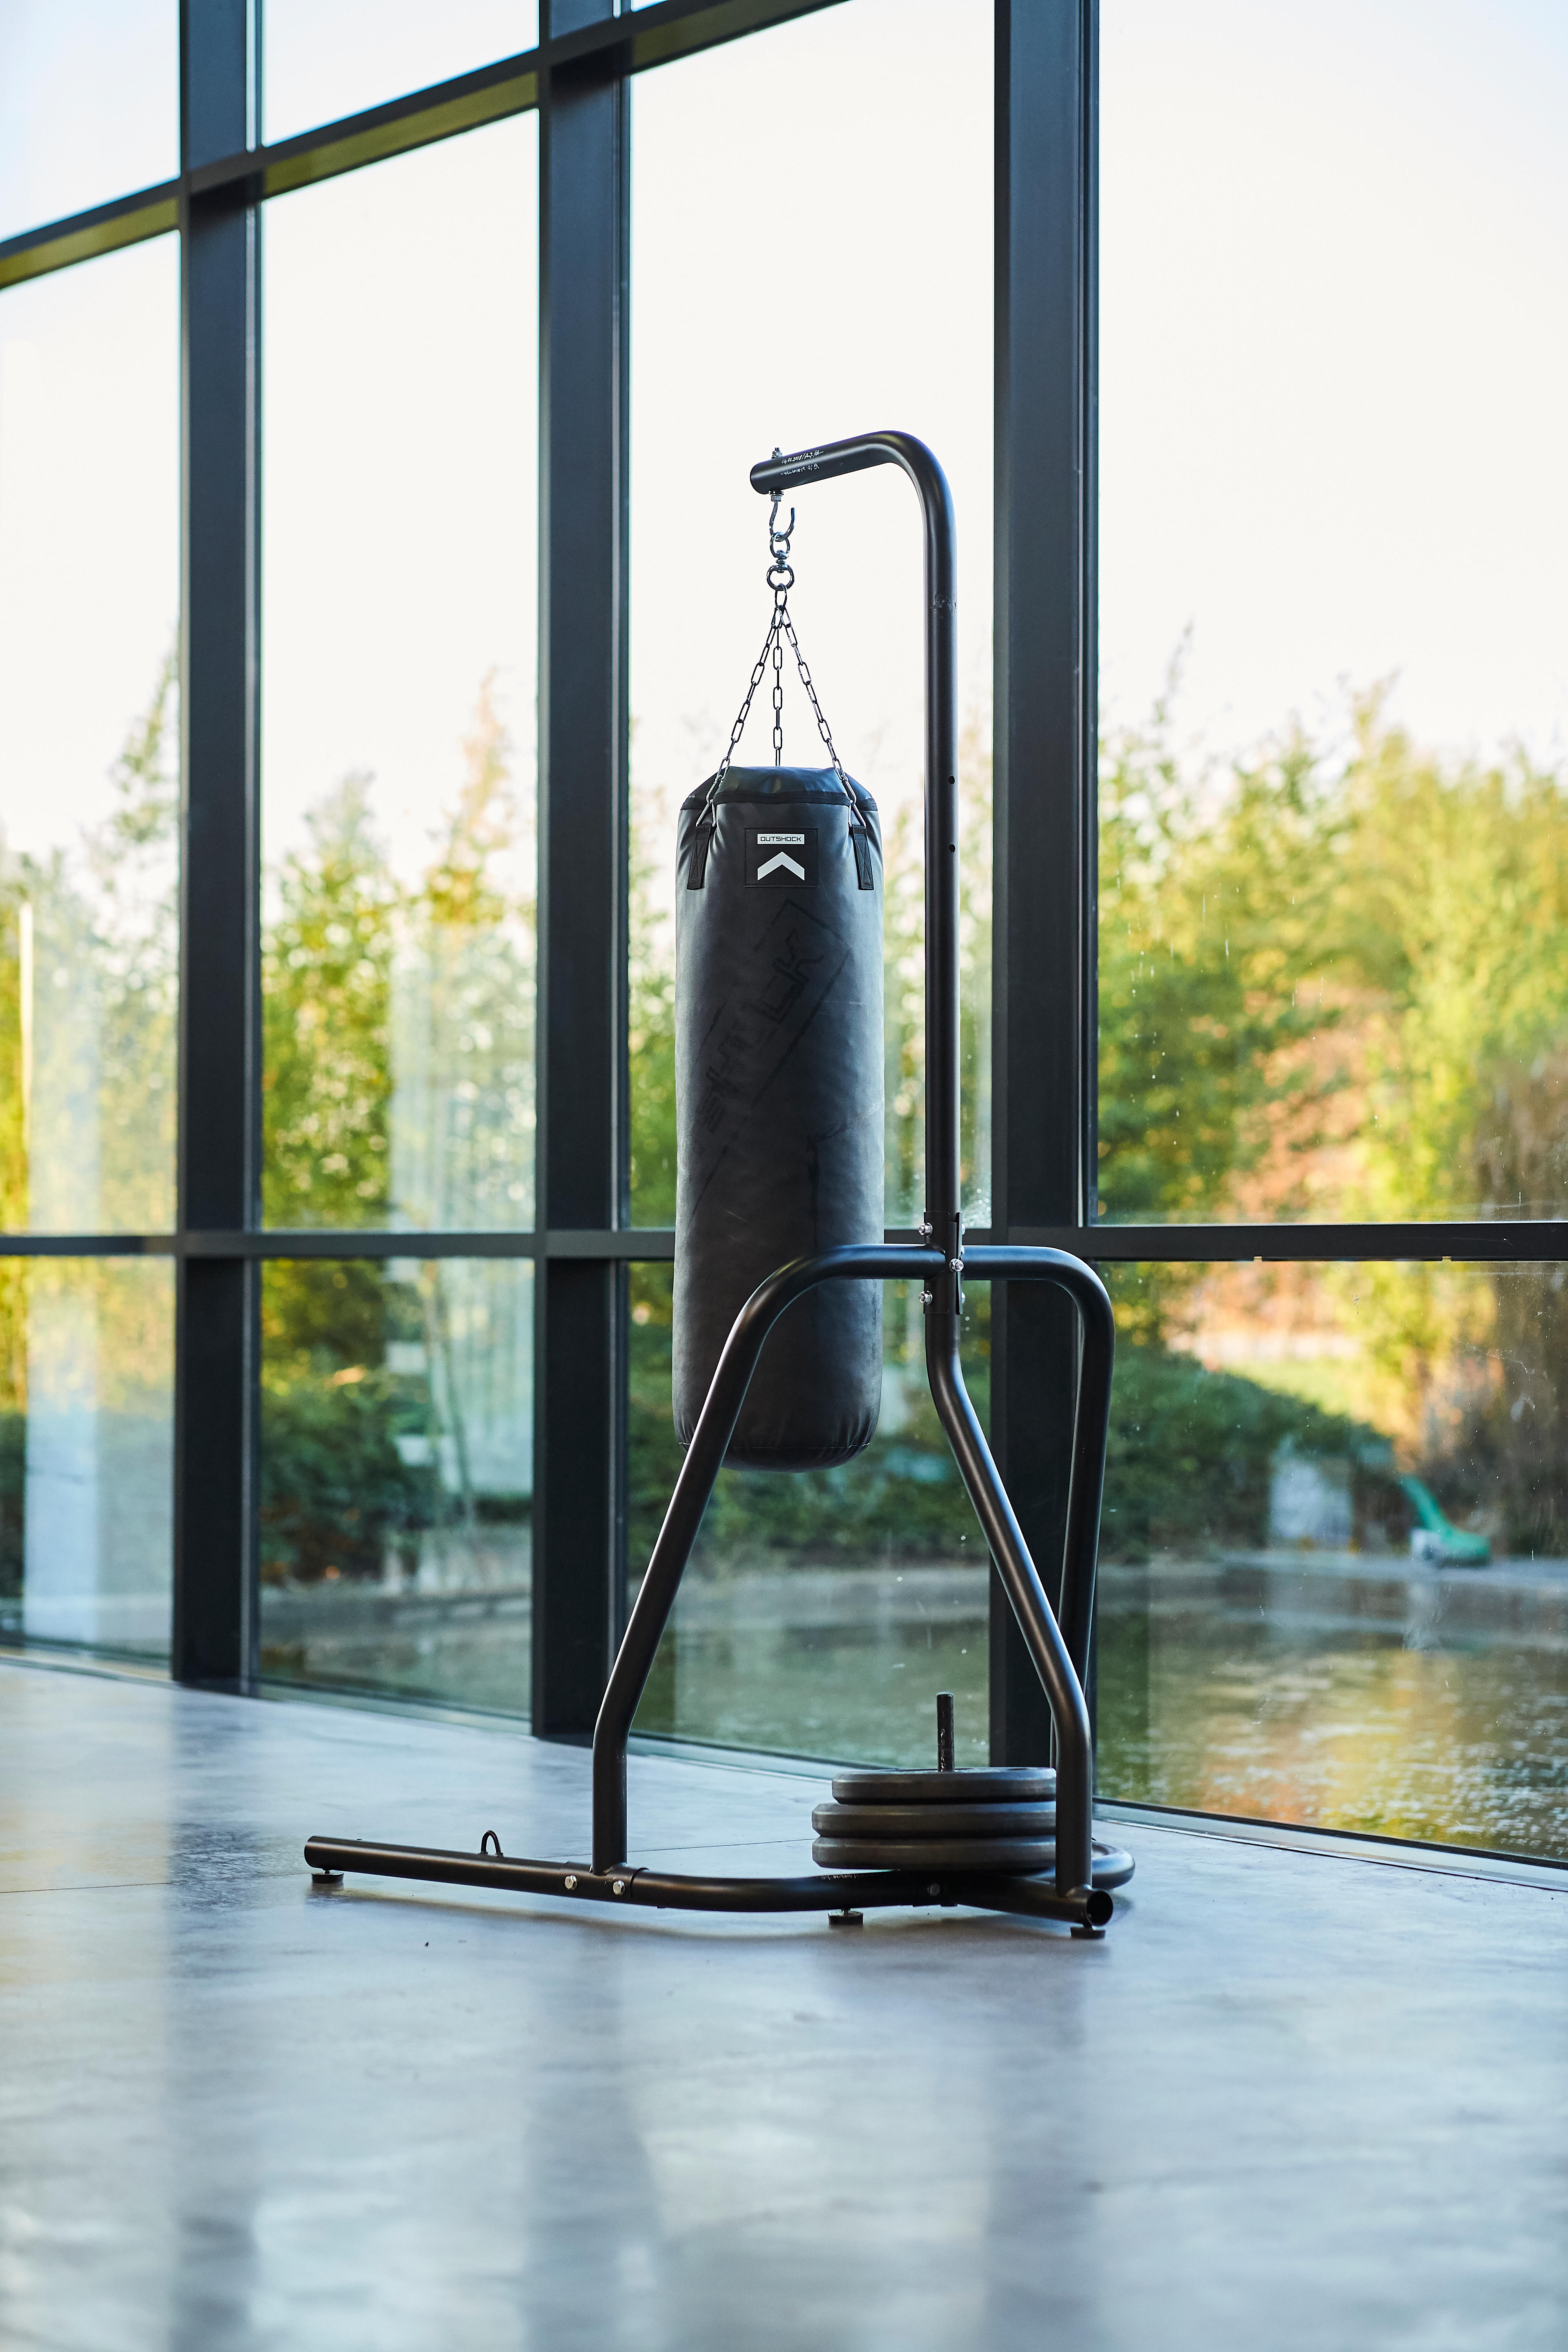 Adult Boxing Free Standing Versatile and Weightable Punching Bag Stand 900